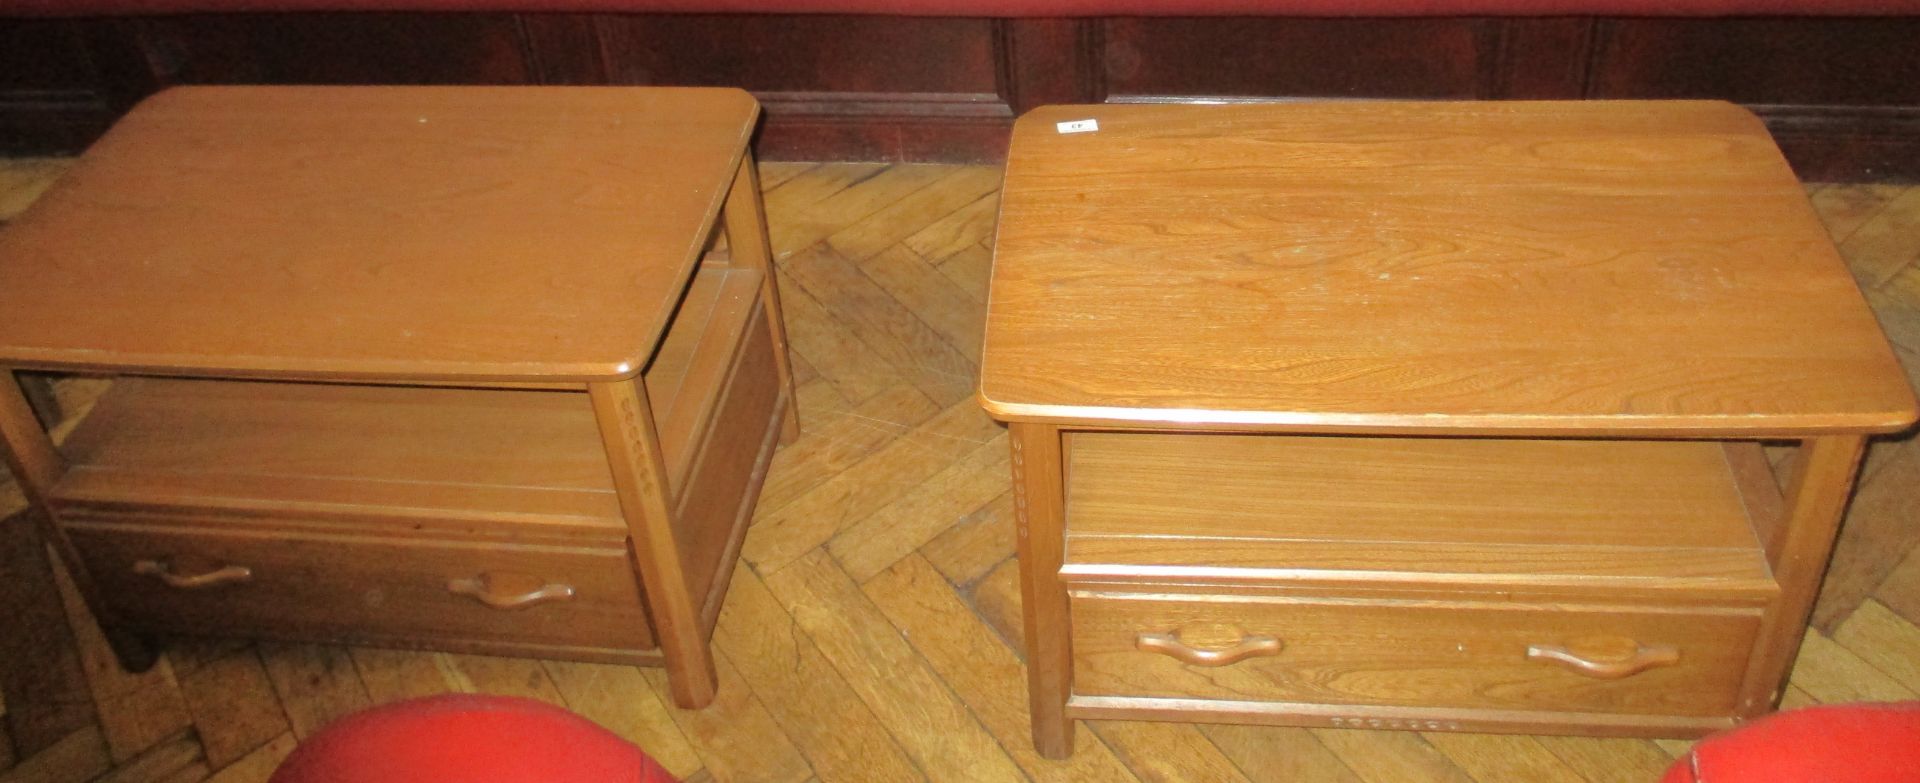 2 x oak television stand/coffee tables with folding triangular back leaf and under drawer.